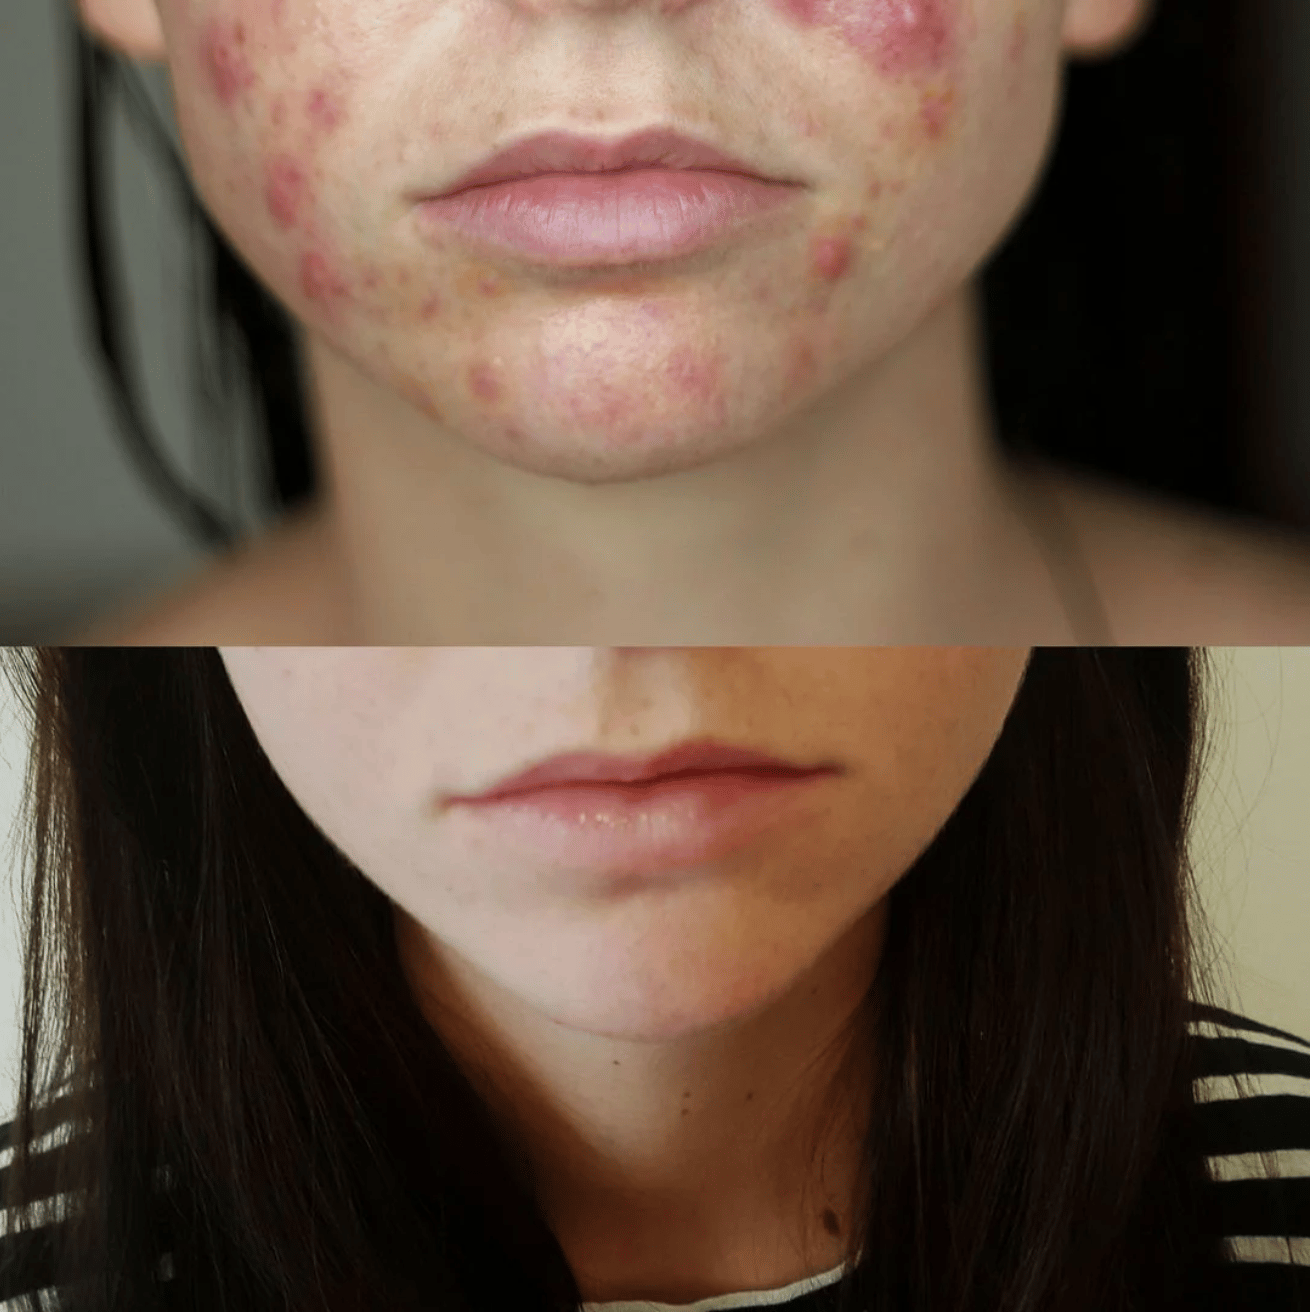 Spironolactone Clears Womans Acne in 4 Months: Before and After Photos ...